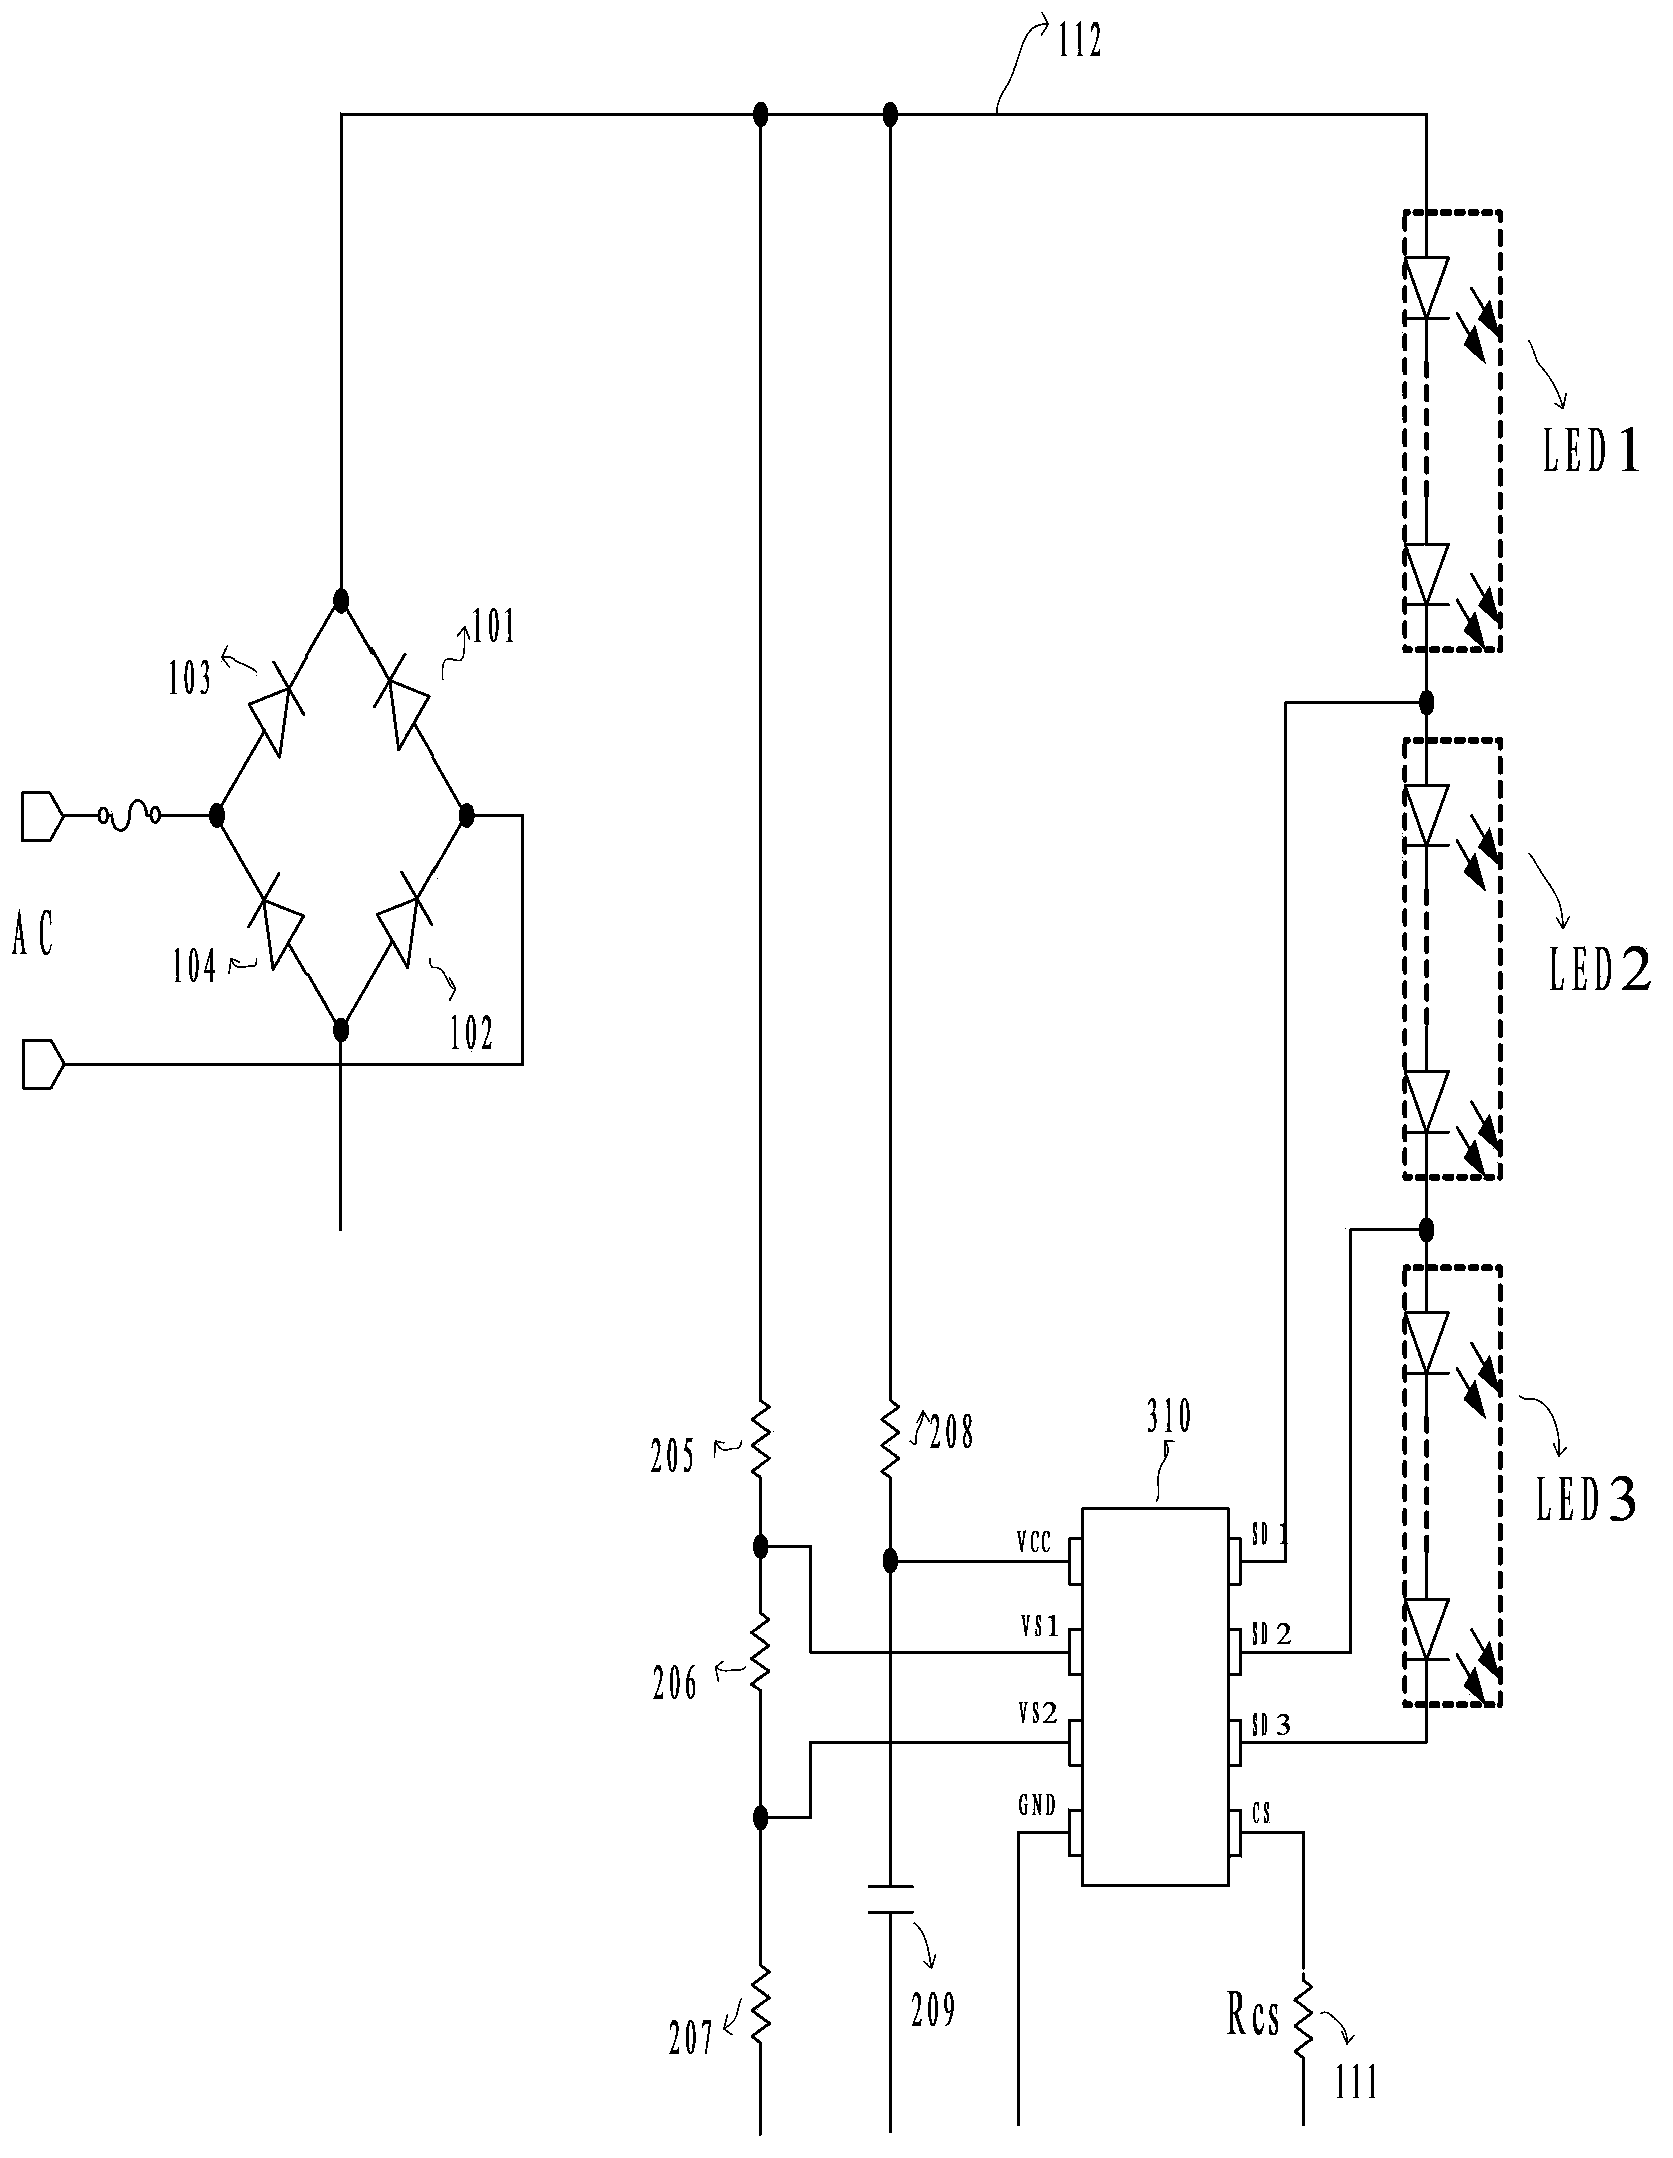 Non-overshoot LED linear constant current drive circuit